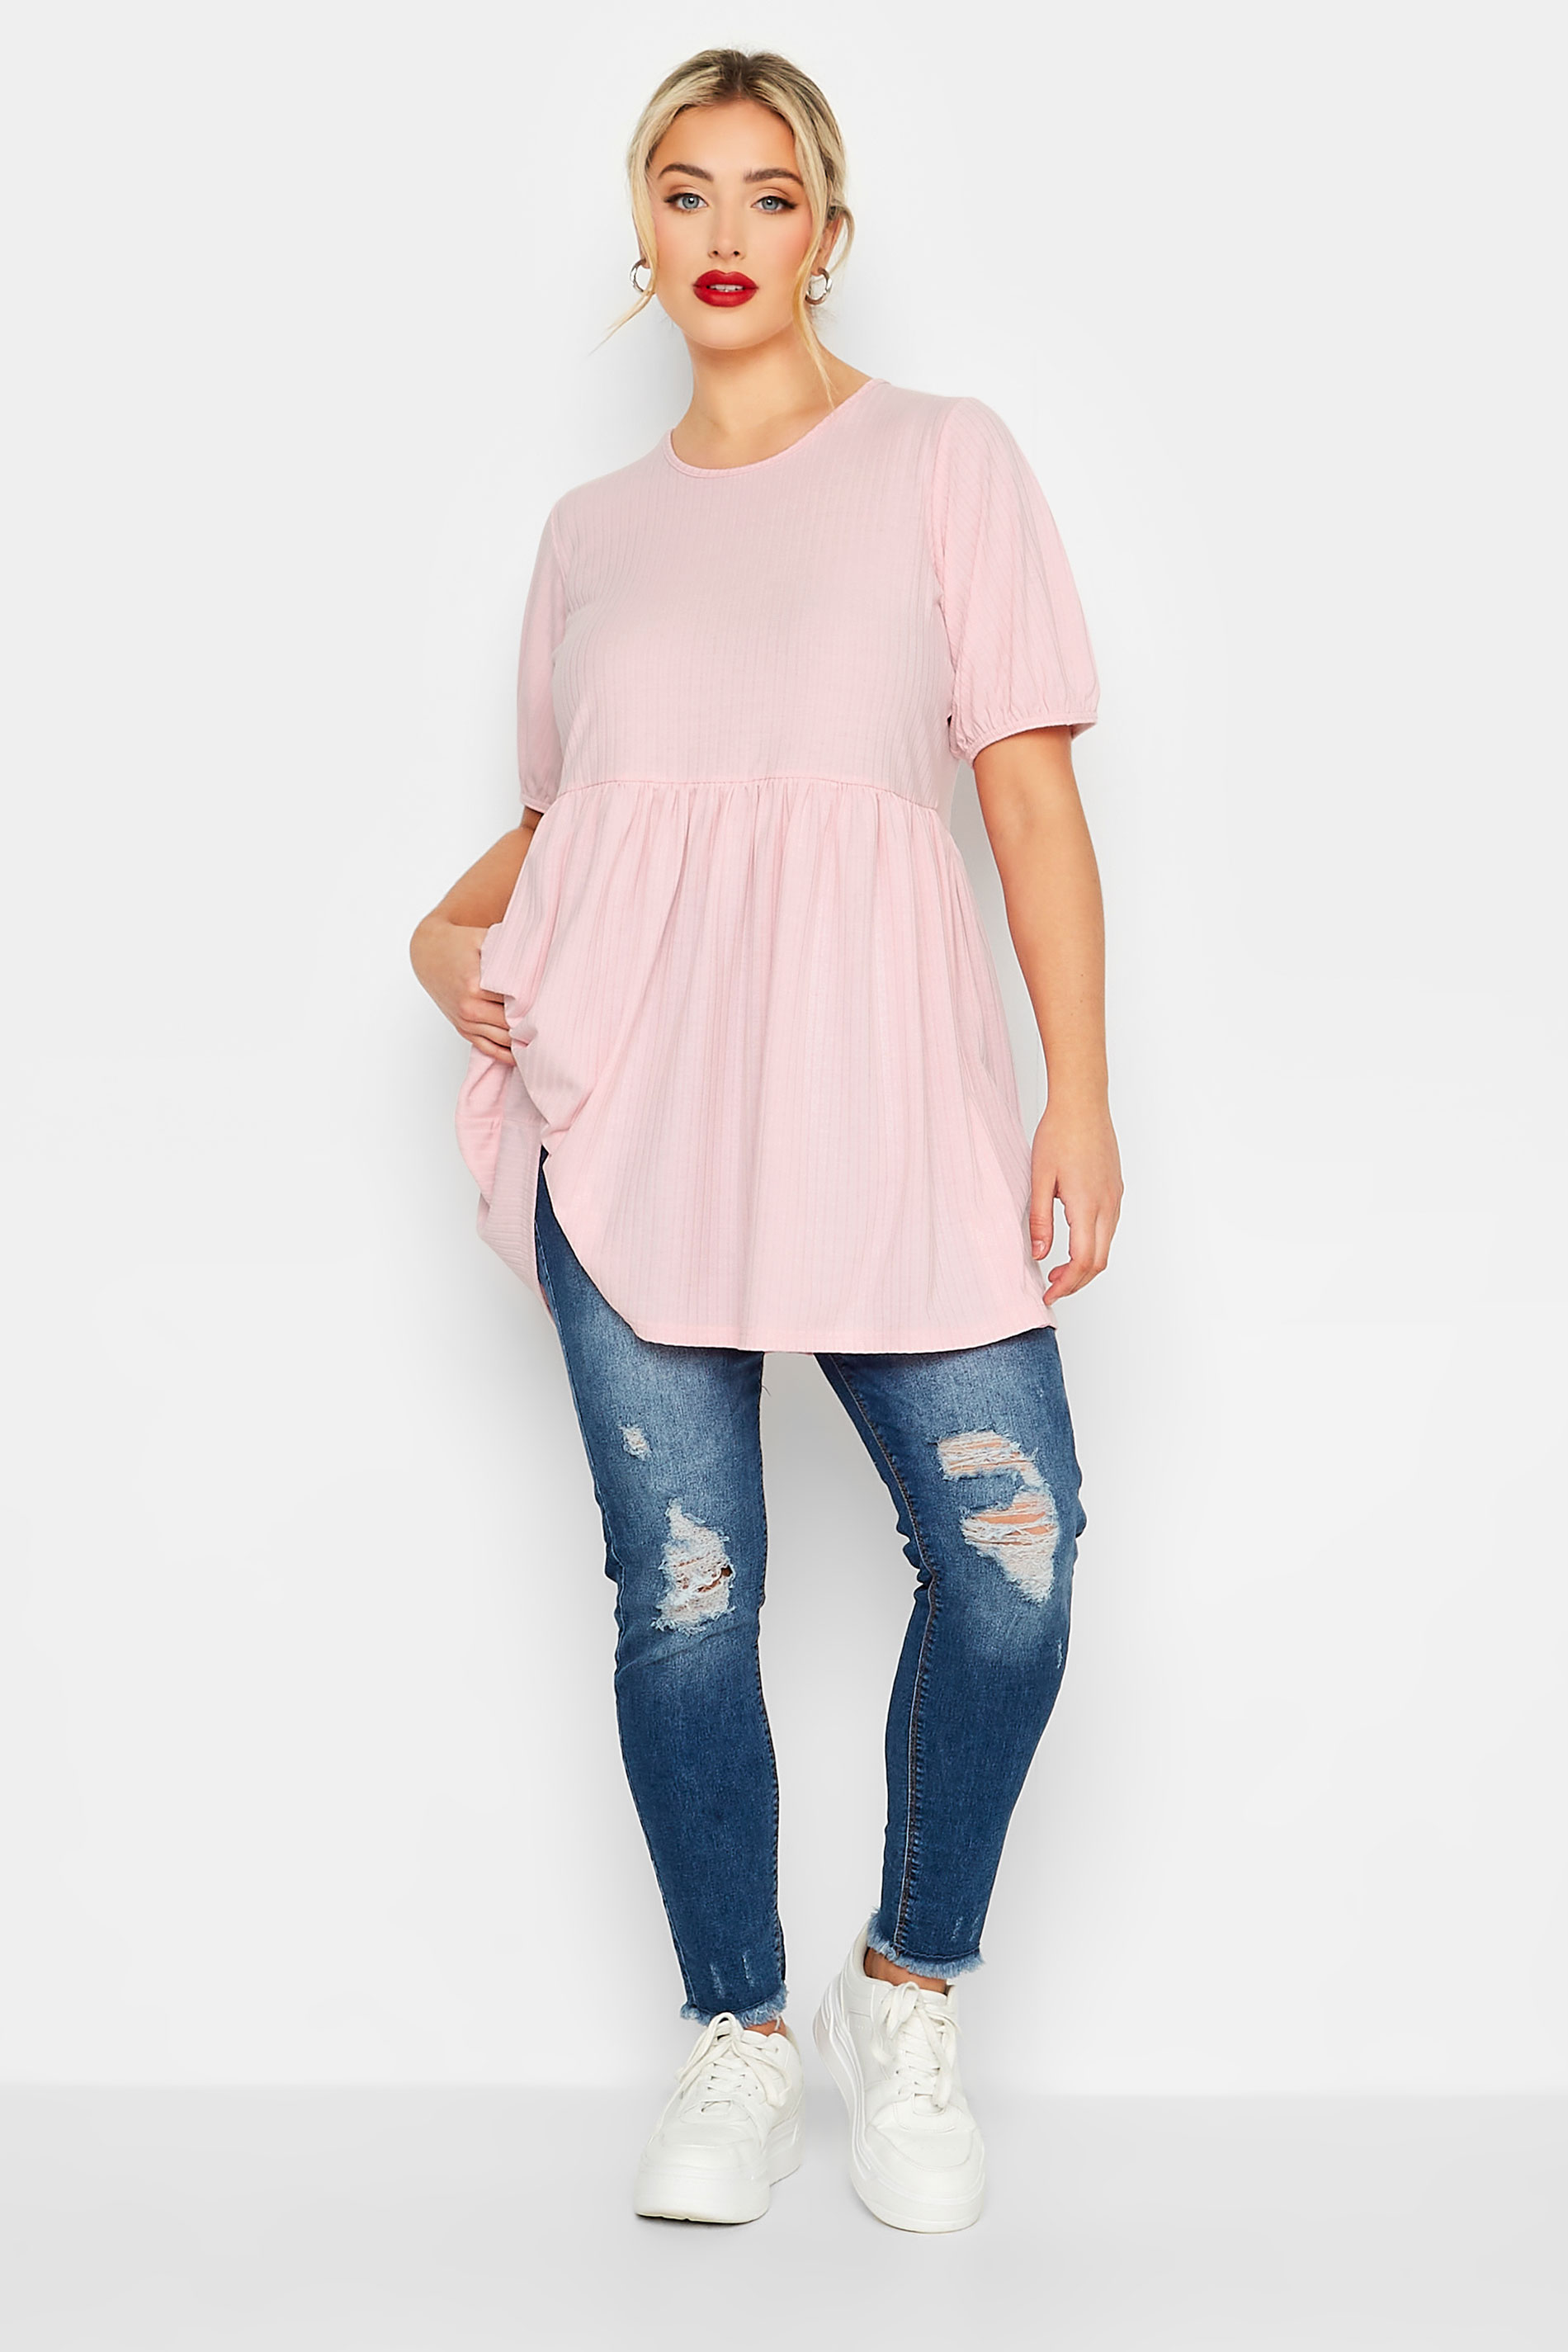 LIMITED COLLECTION Plus Size Blush Pink Tie Back Peplum Top | Yours Clothing 3